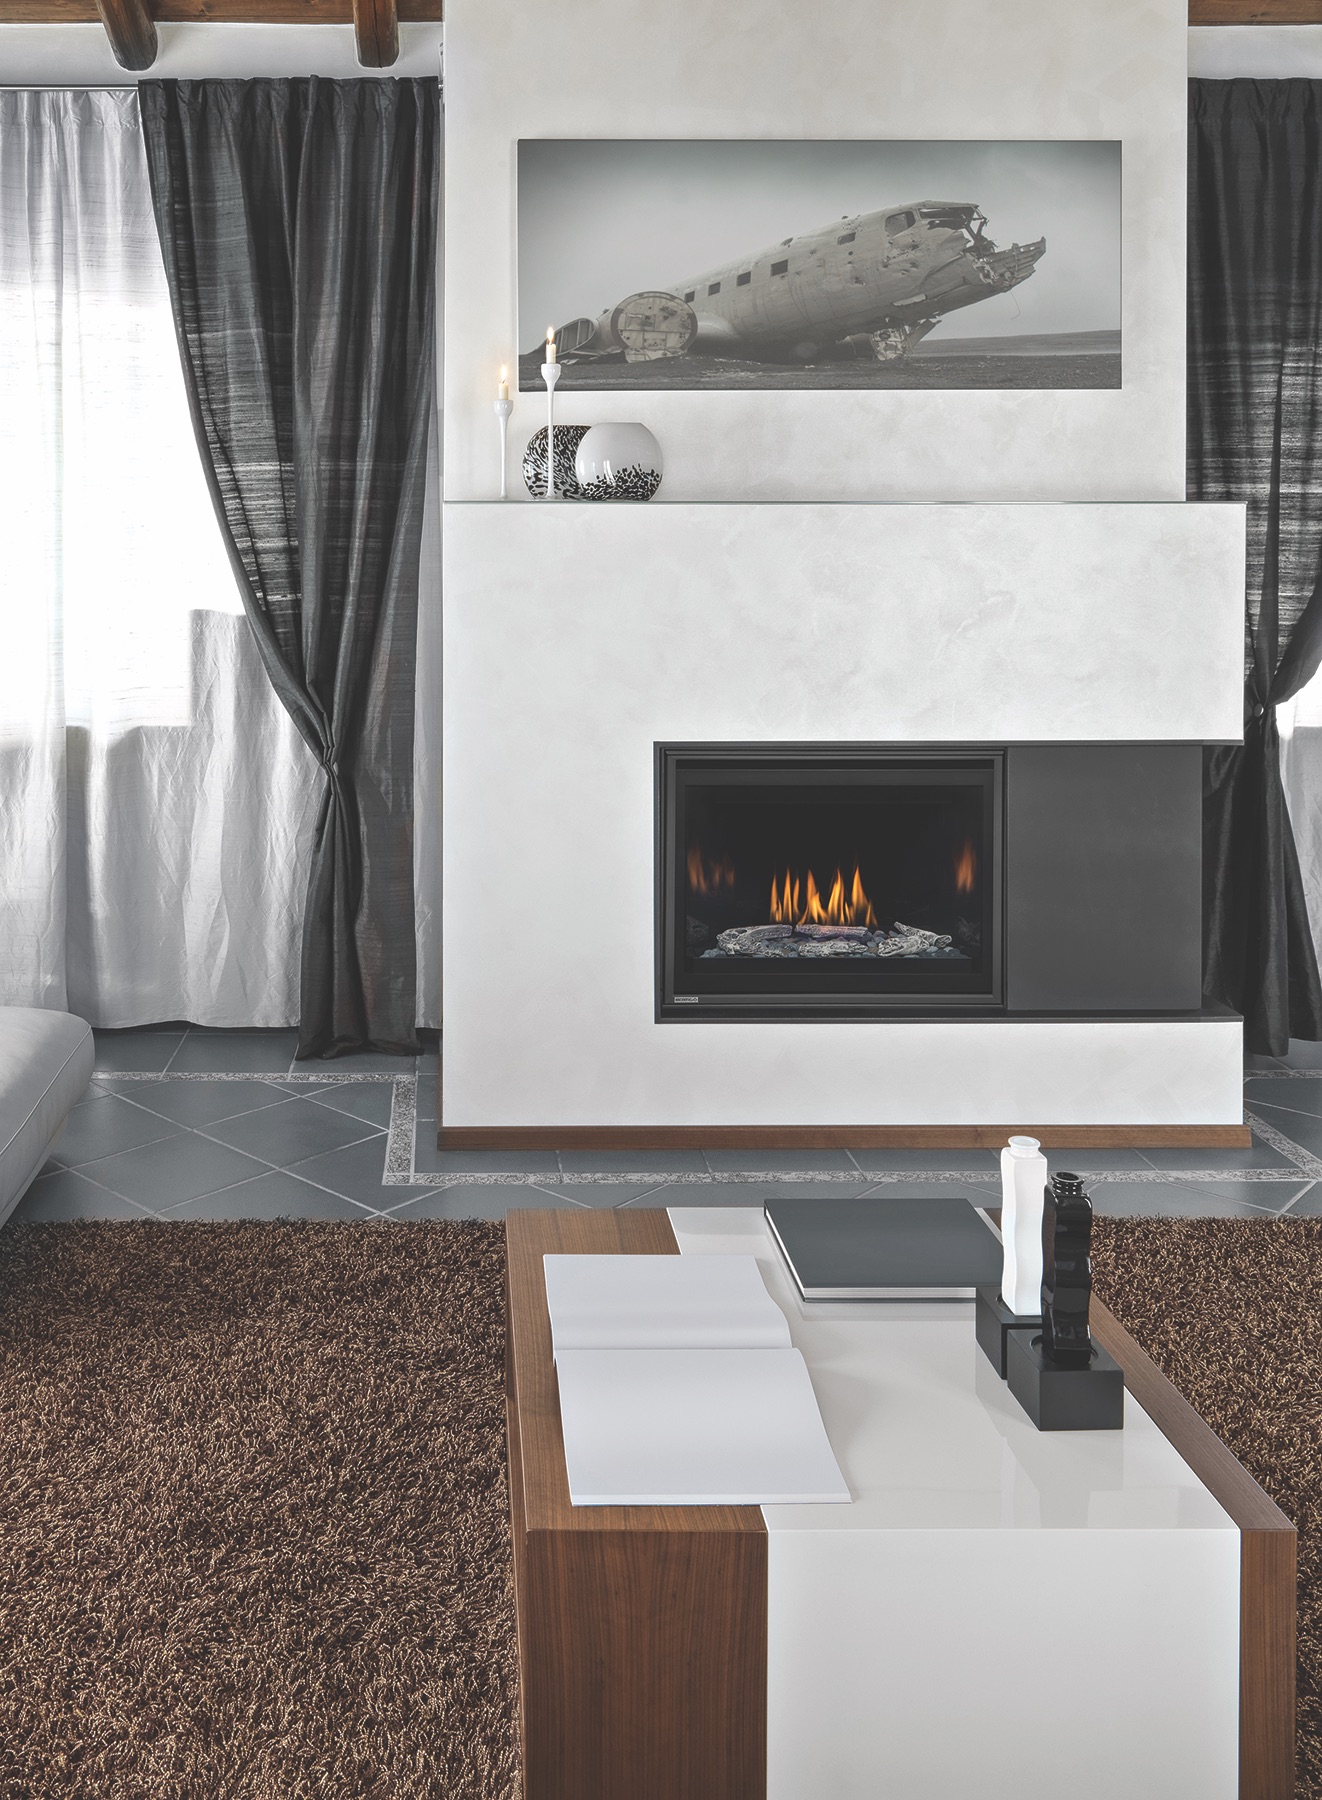 The full-load deluxe version of the HLB34-2 from Montigo features a standard remote control and fan kit so users can accurately control the heat in a space.